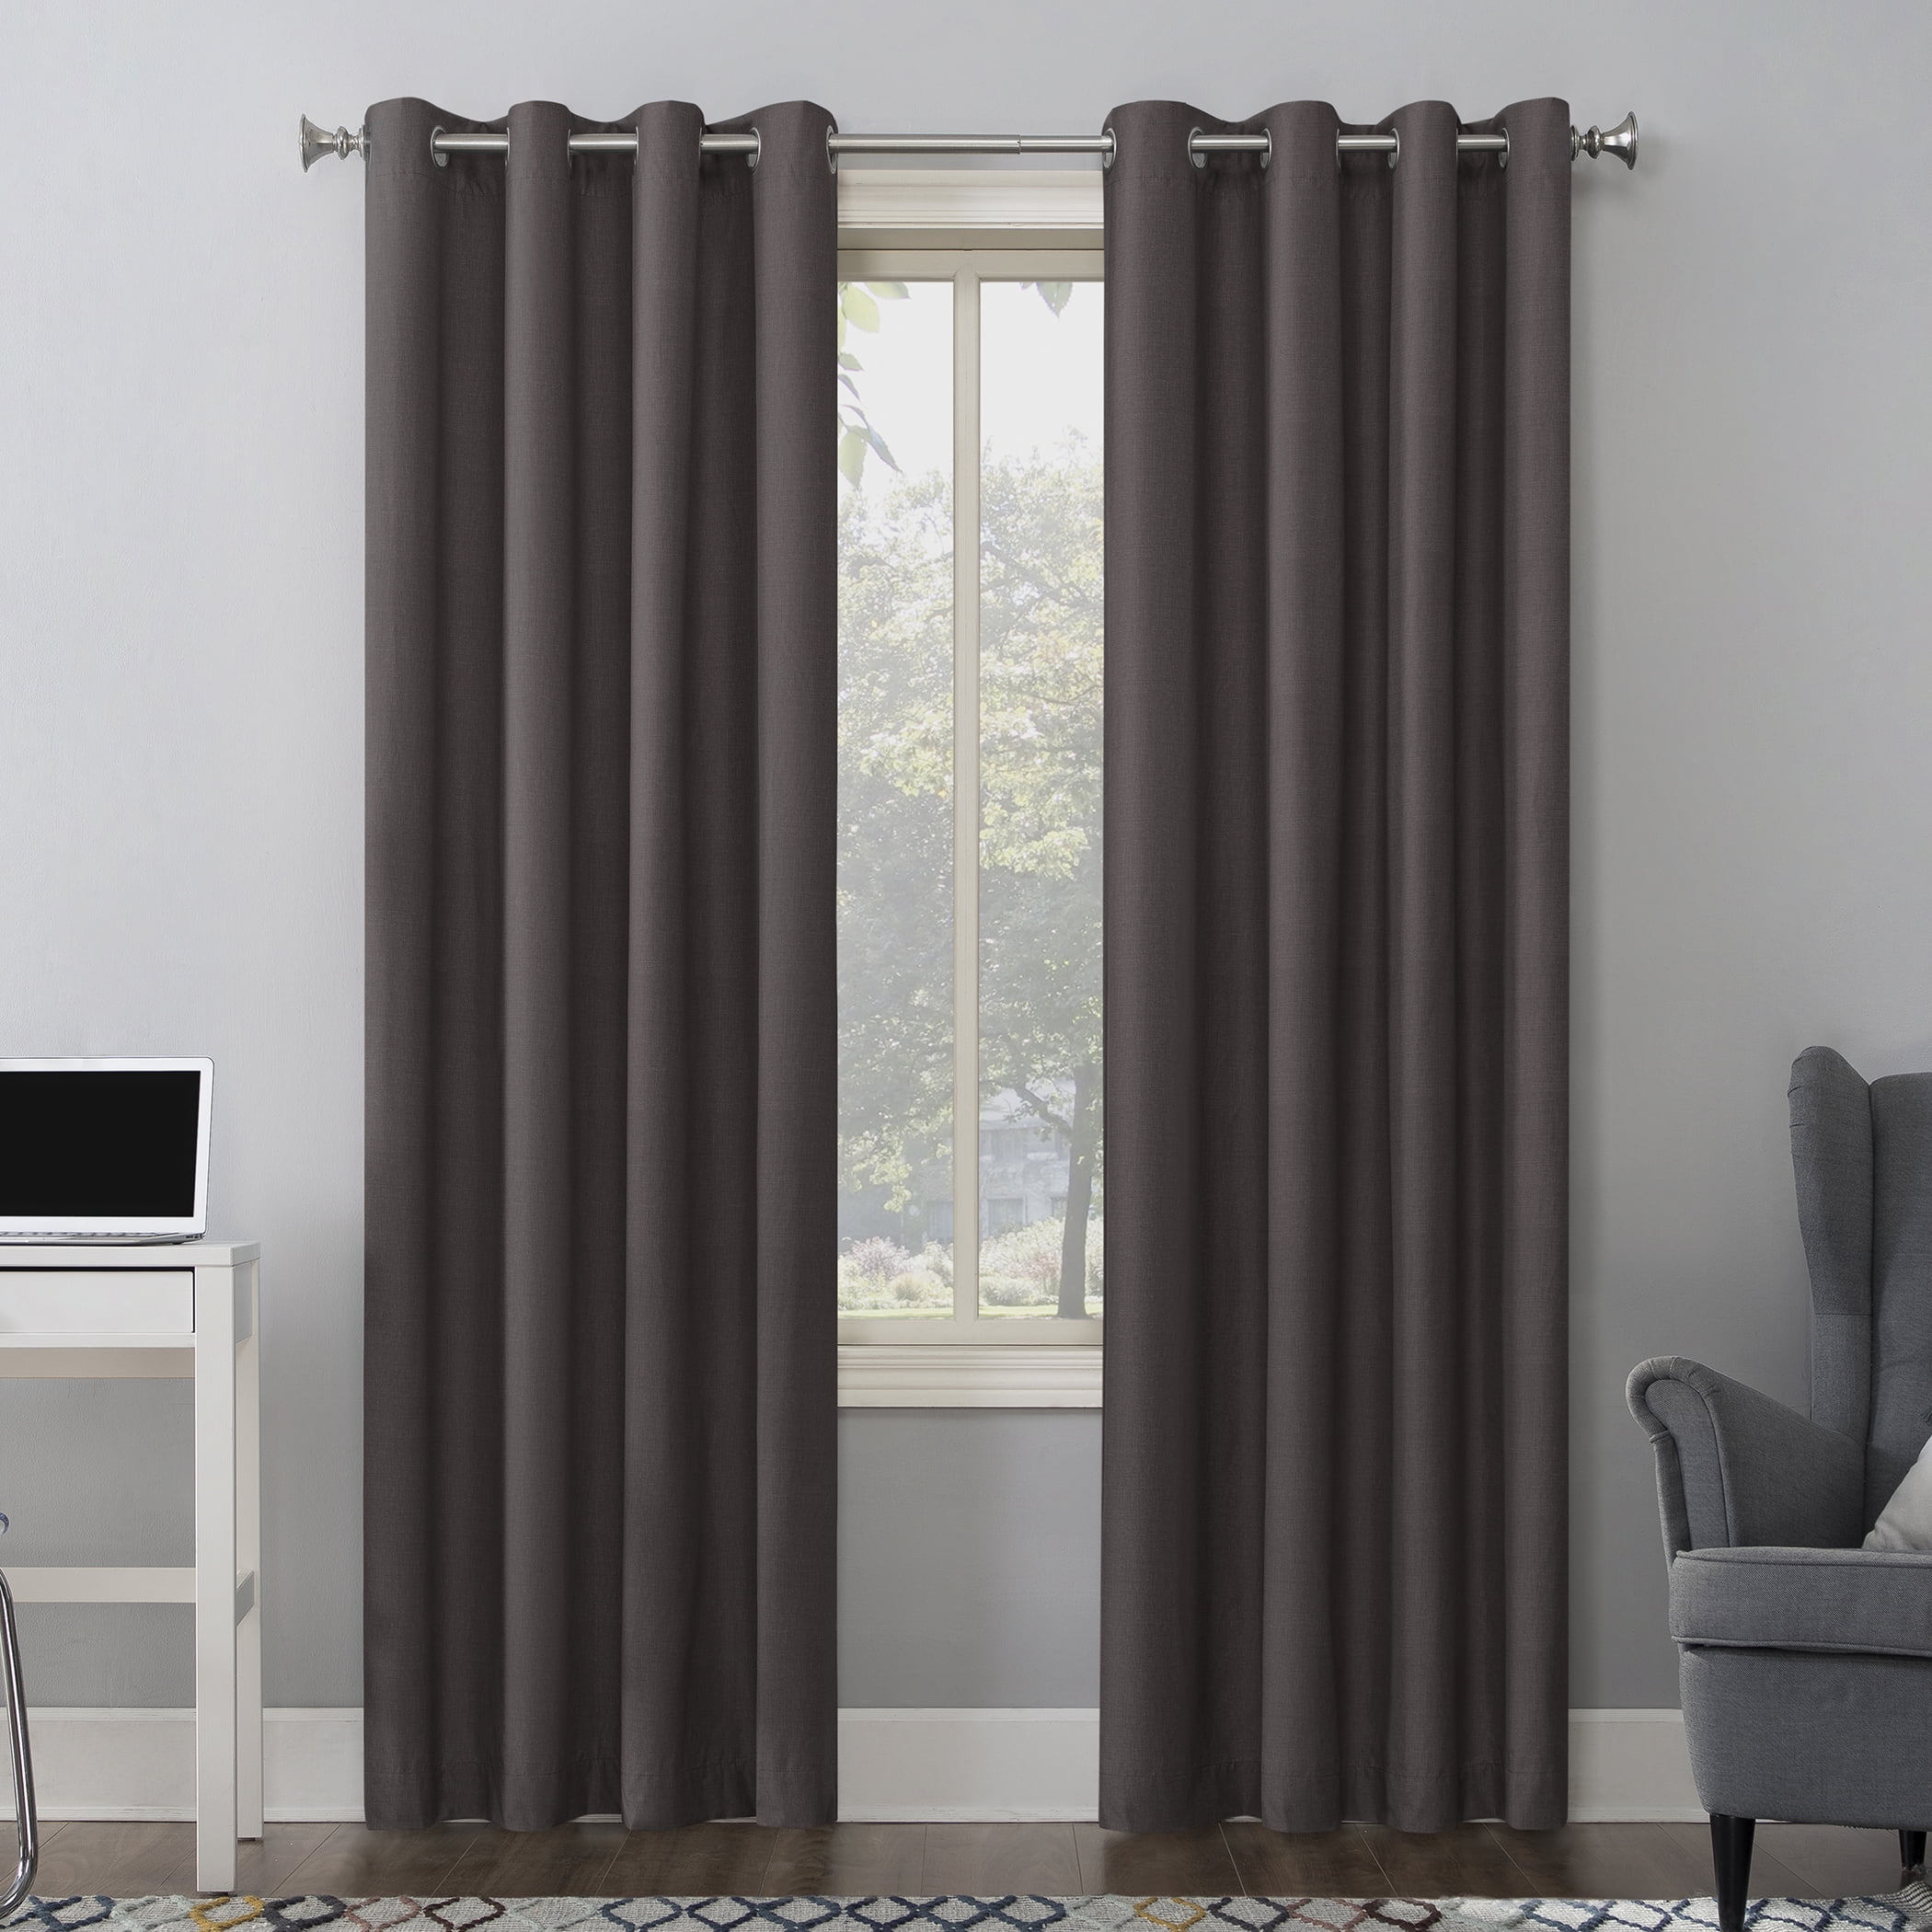 100% Blackout Panels Heavy Thick Grommet Bay Window Curtain 1 Set CHARCOAL GRAY 